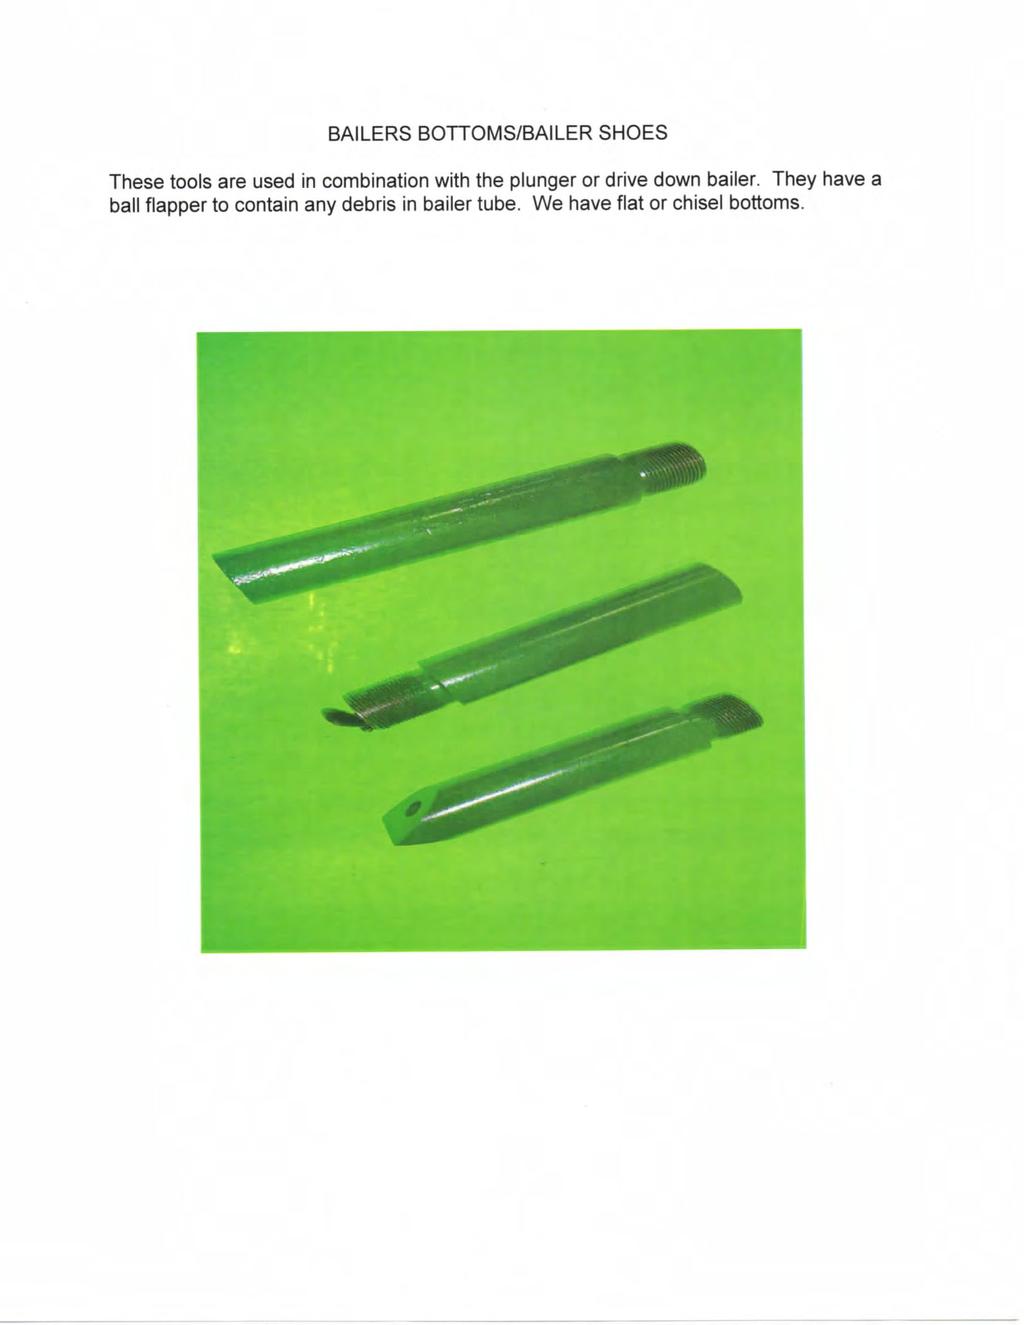 BAILERS BOTTOMS/BAILER SHOES These tools are used in combination with the plunger or drive down